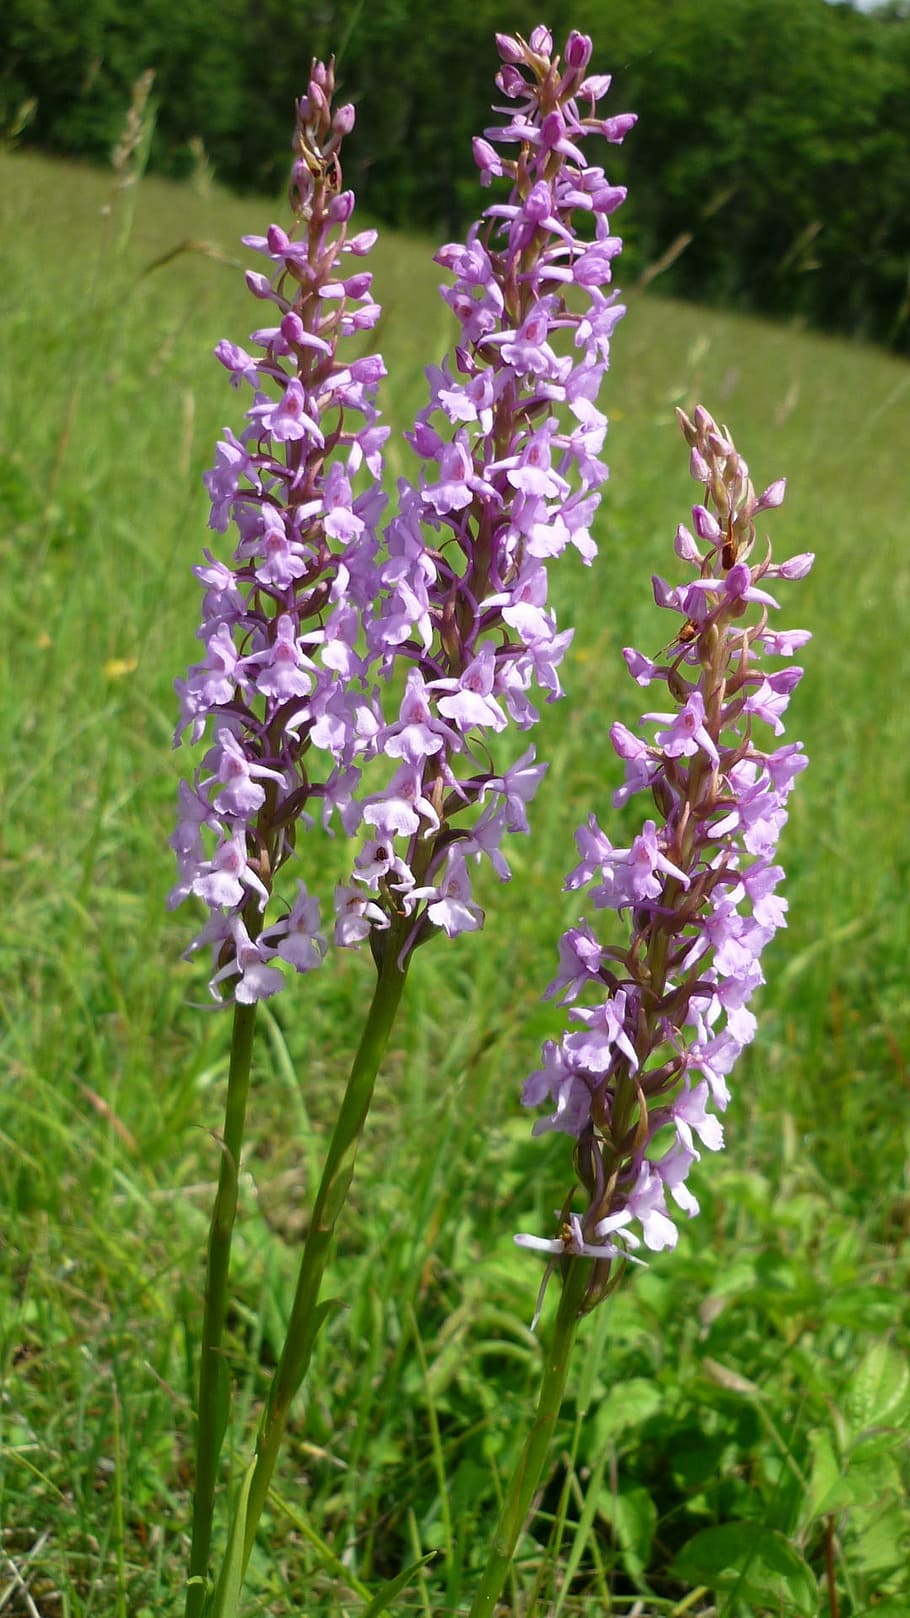 mueckenwurz, german orchid, often, attractive group, mountain meadows, HD wallpaper